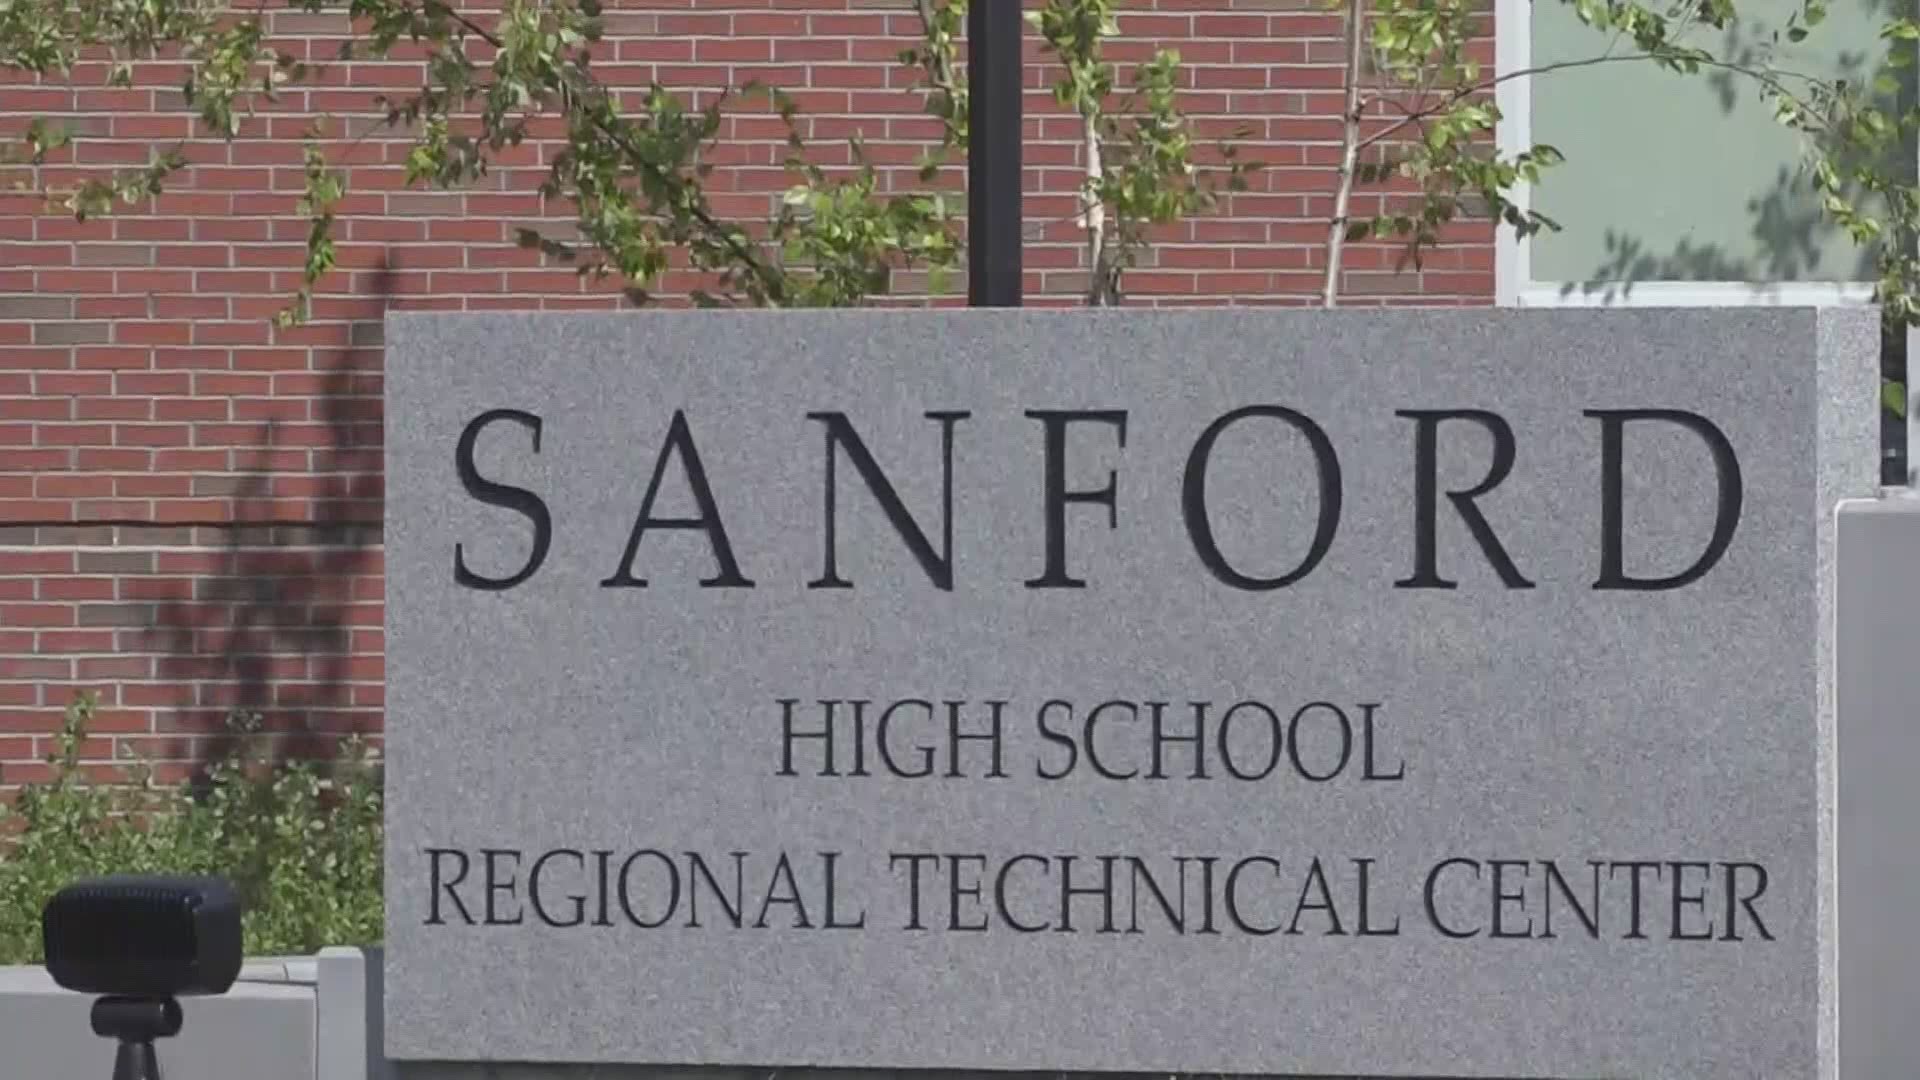 Sanford High School and Regional Technical Center are now fully remote learning due to 12 cases of COVID-19 associated with the schools.